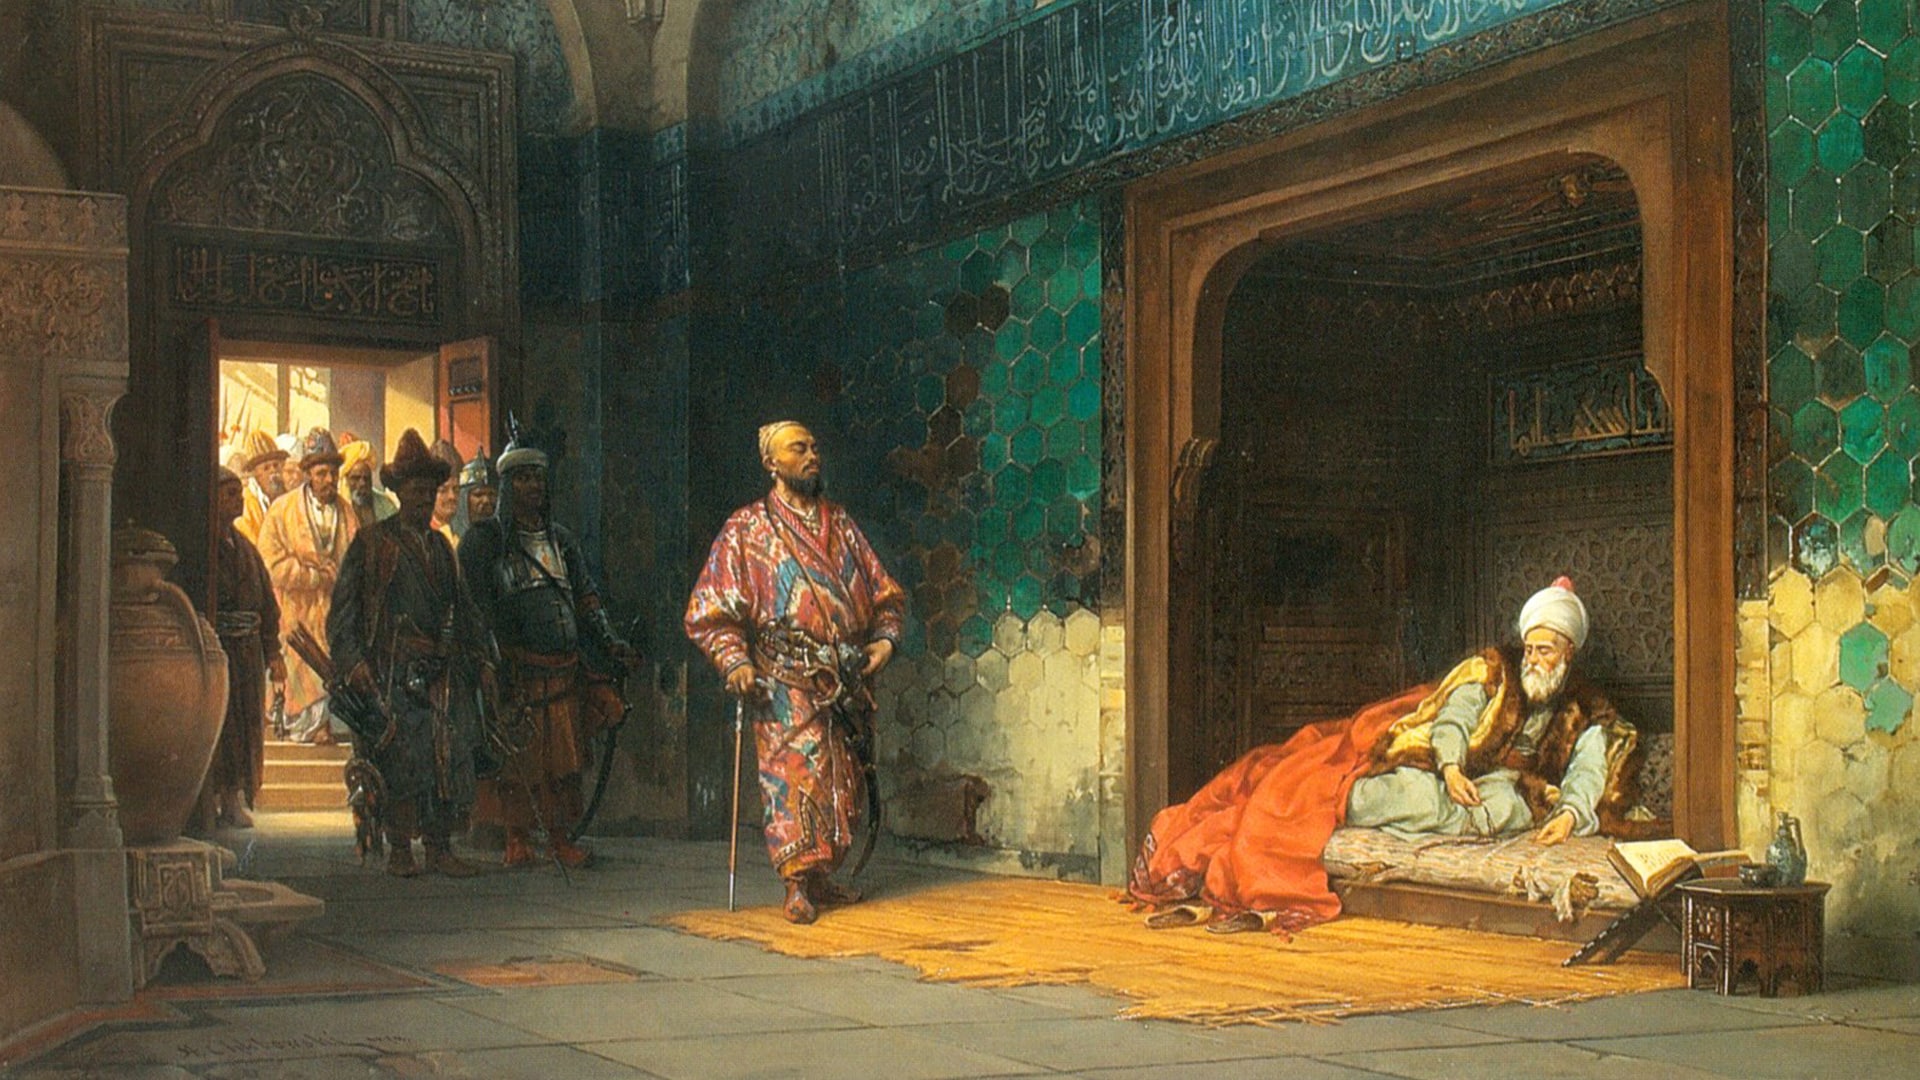 Tamerlano - A painting of a prisoner being brought to stand proudly in a courtyard in front of a reclining man. The courtyard is Islamic in character, and their dress is Ottoman Turkish.